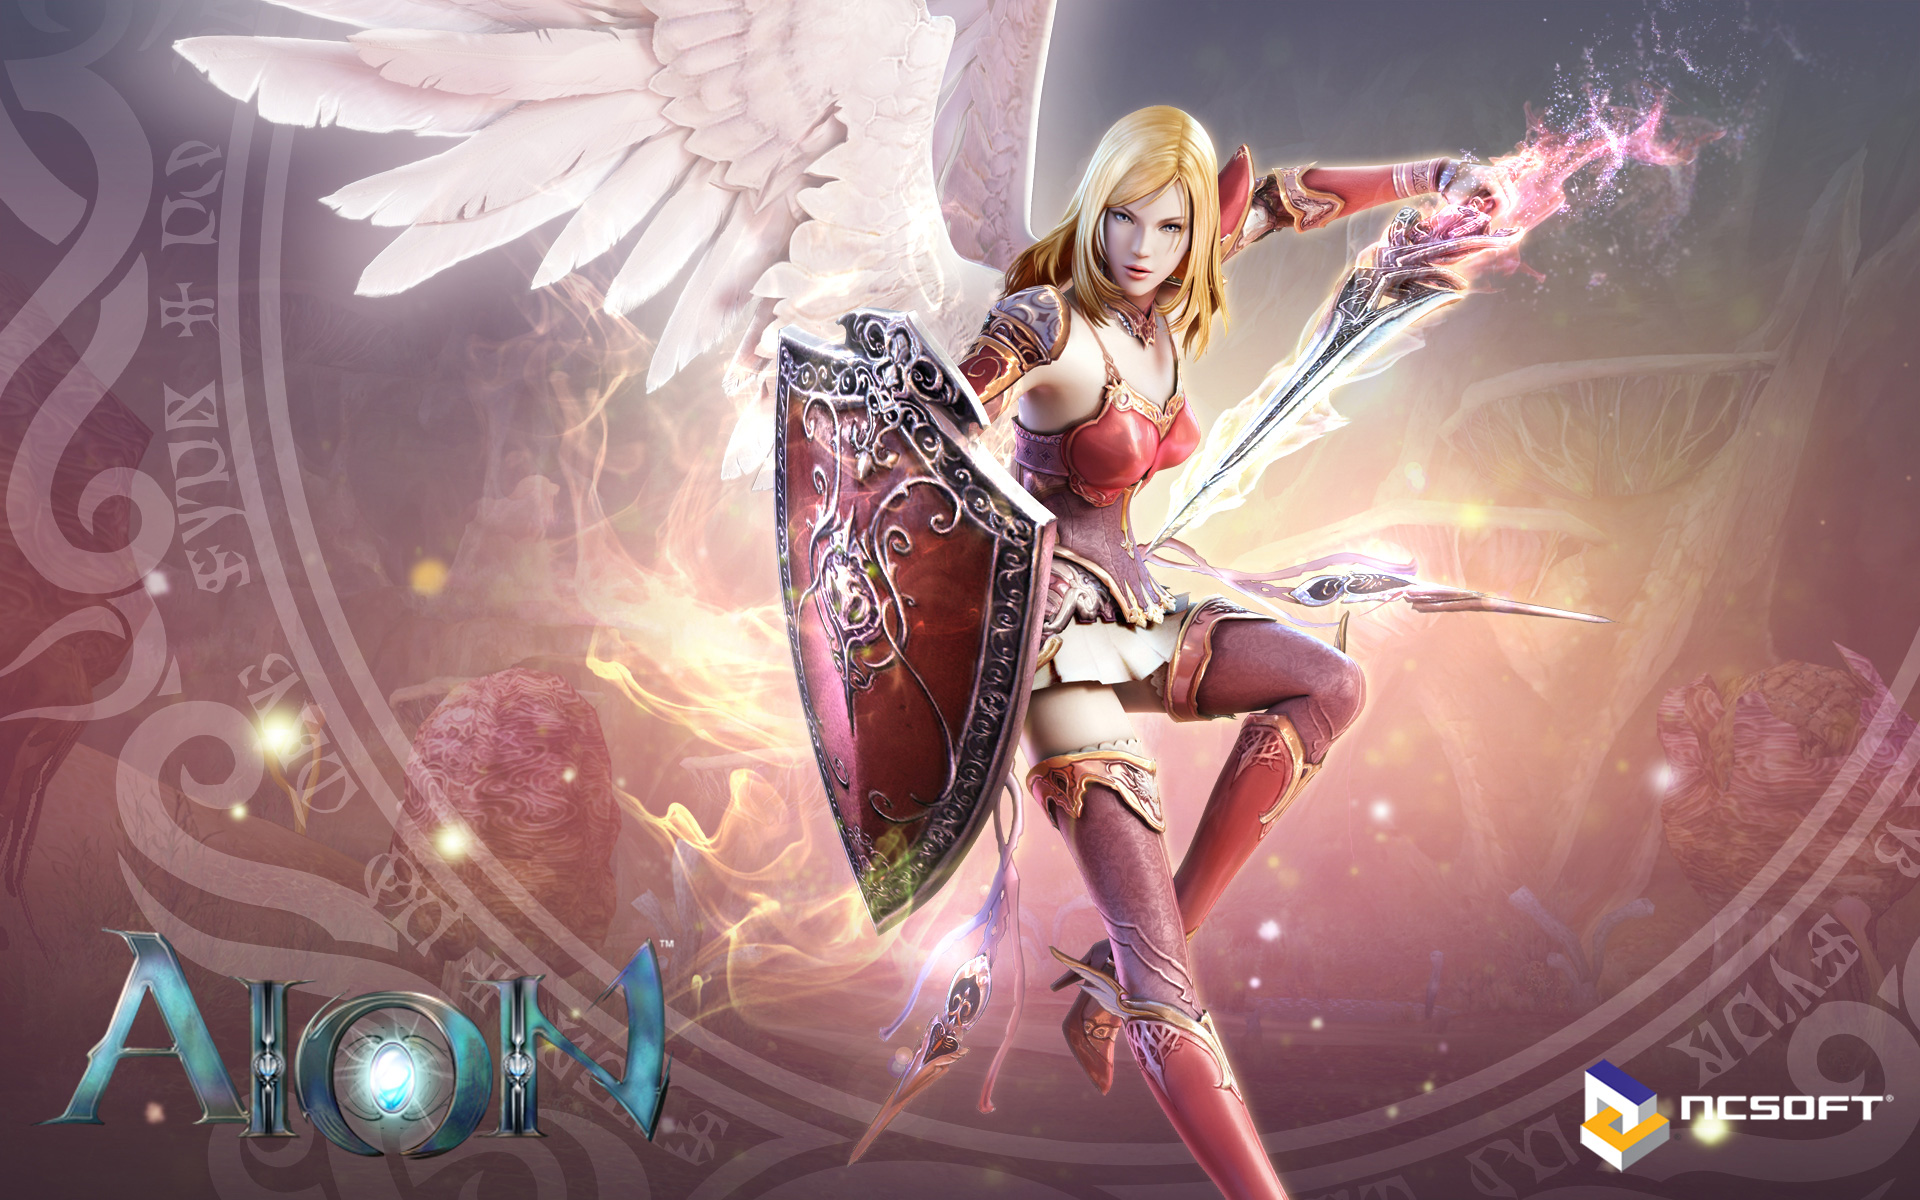 Aion 4K wallpapers for your desktop or mobile screen free and easy to download